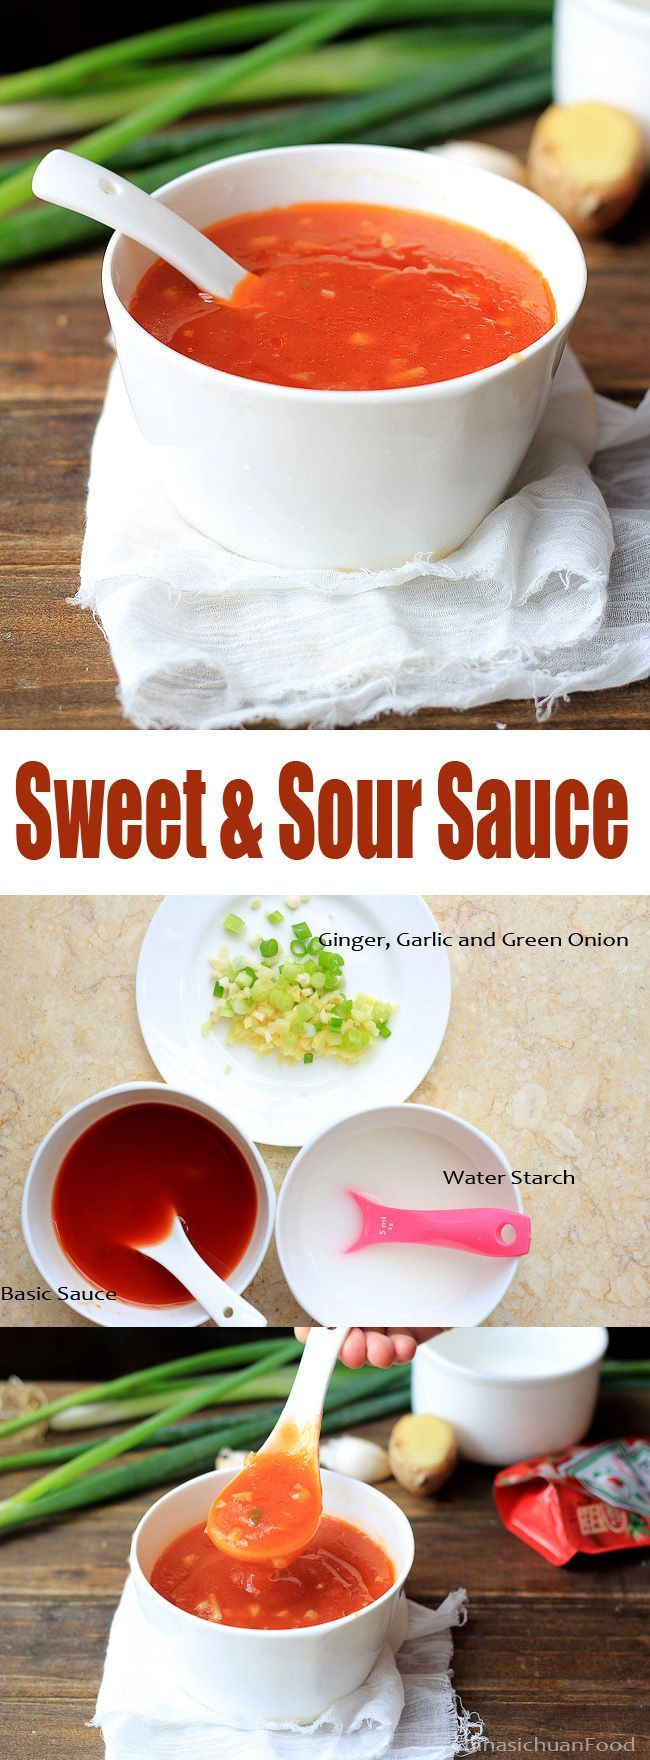 Chinese Sweet And Sour Sauce Recipes
 Chinese Sweet and Sour Sauce Recipe in 2019